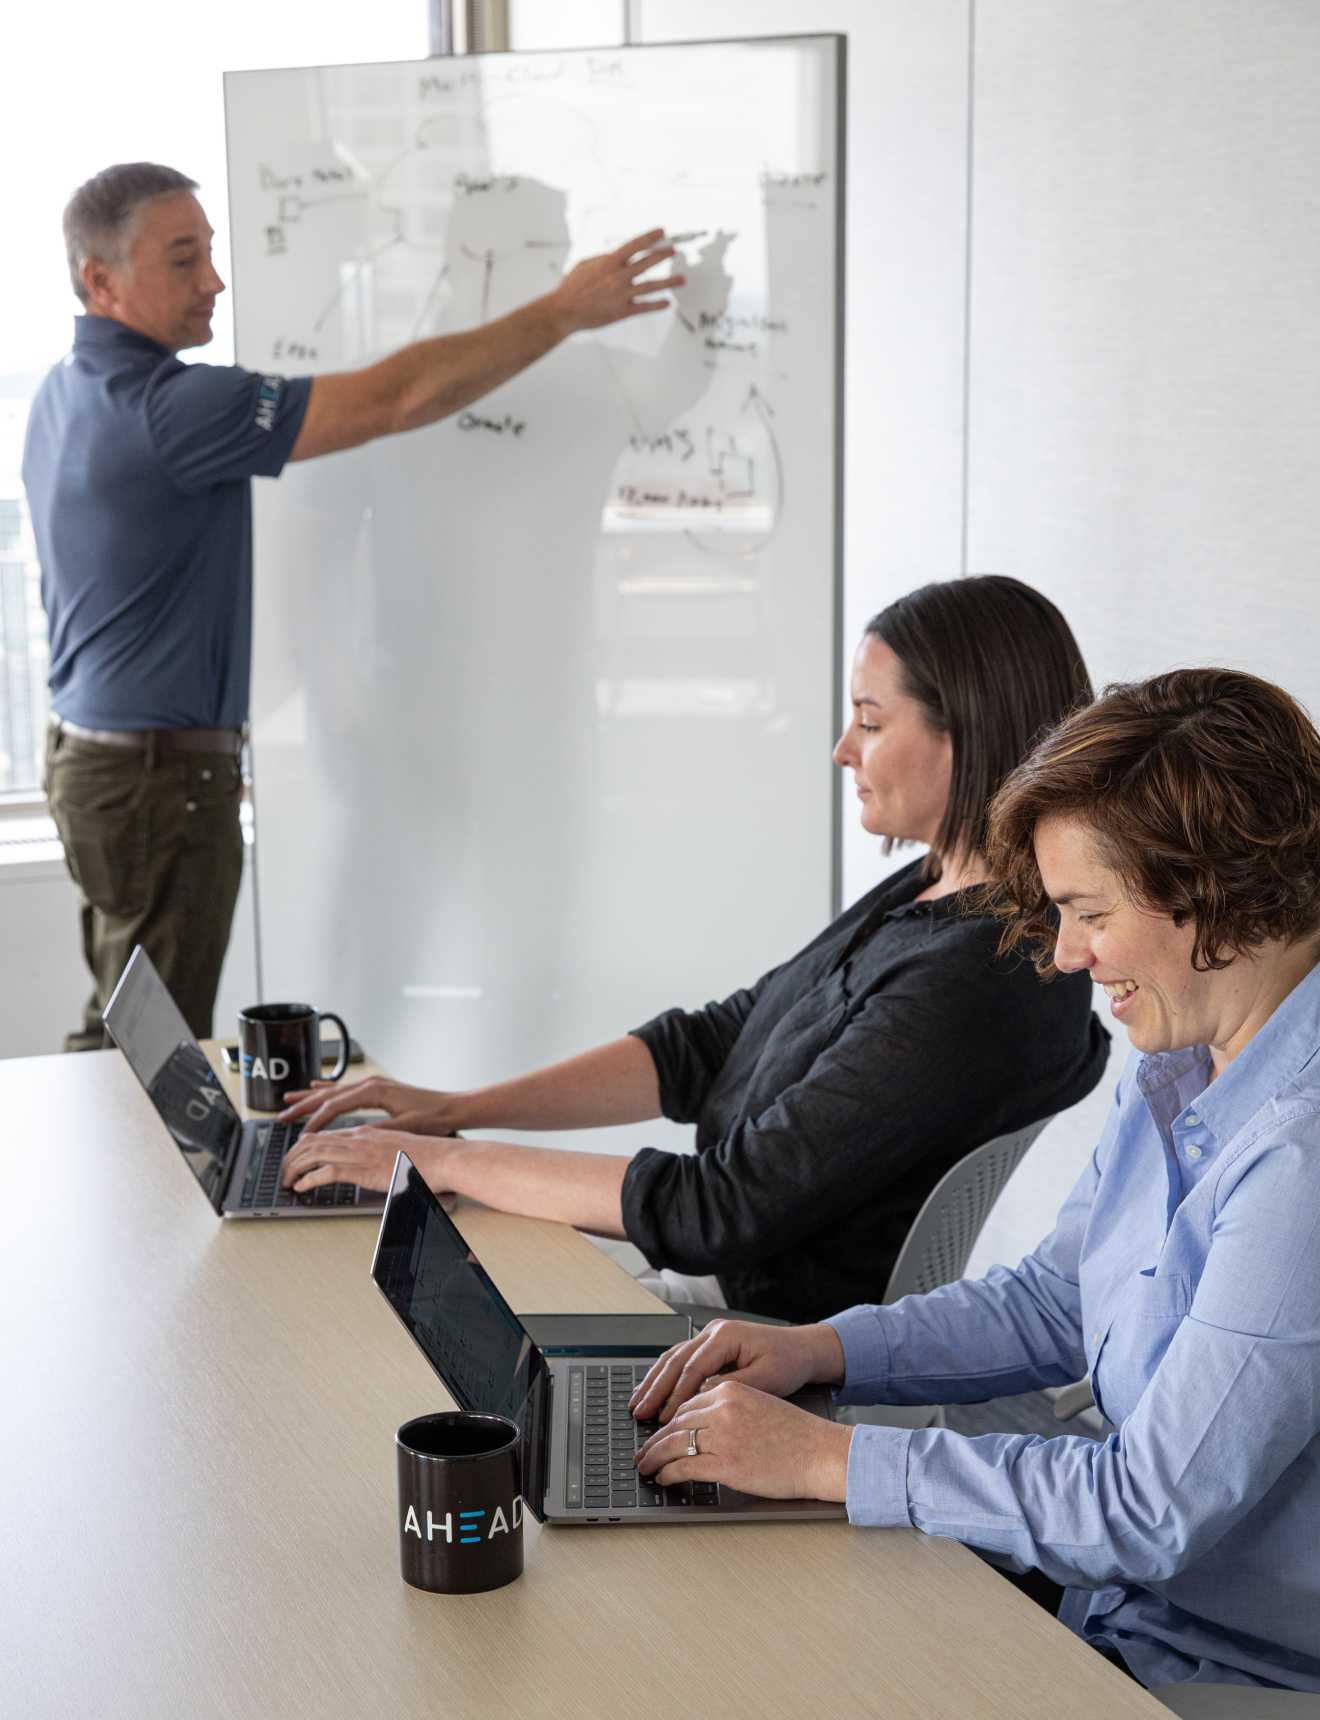 A man presenting on a whiteboard to two people on their laptops in a brightly lit office